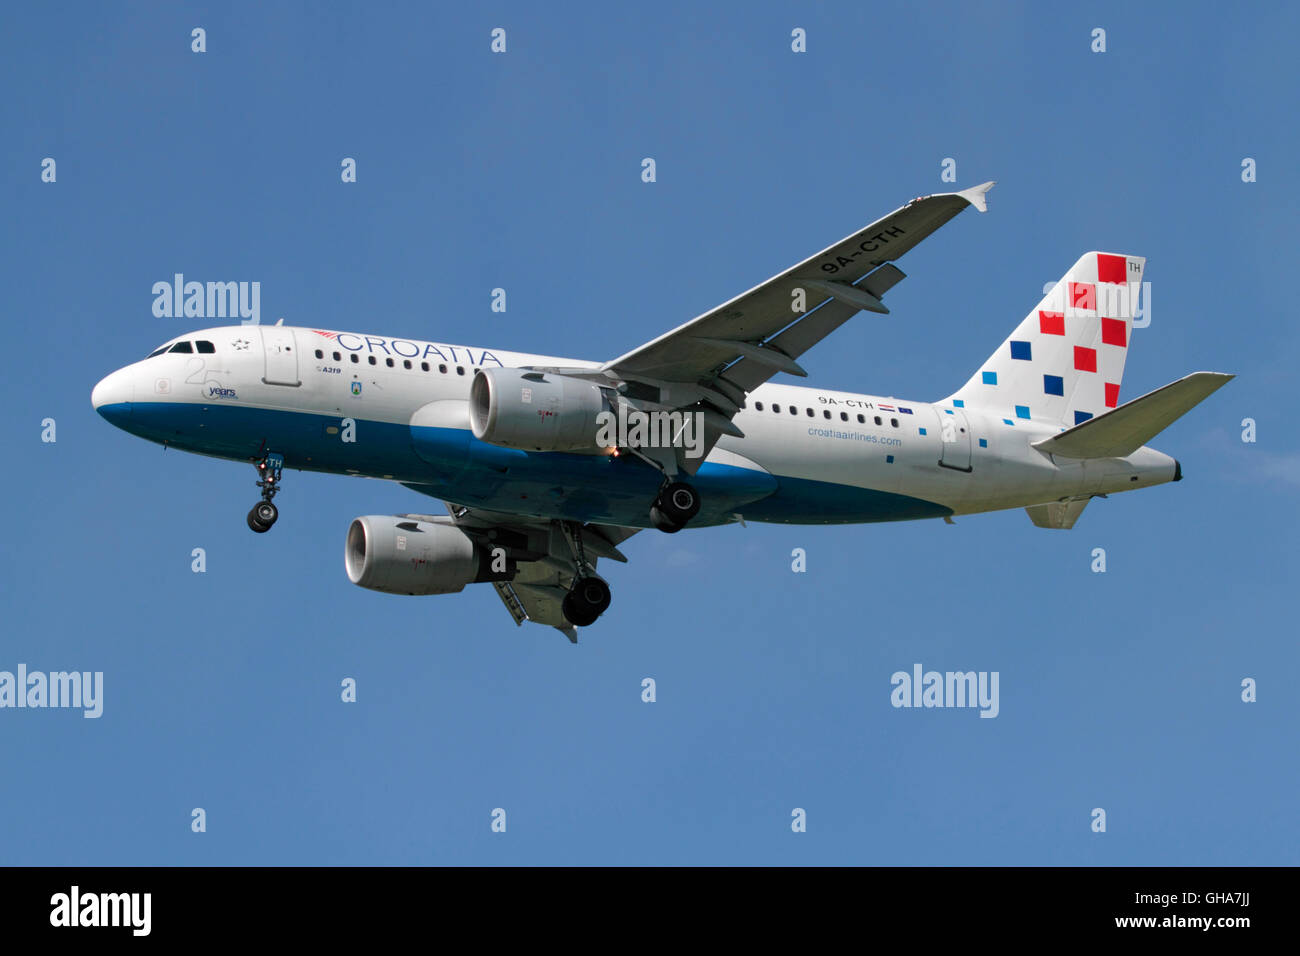 Croatia Airlines Airbus A319 jet airliner on approach Stock Photo